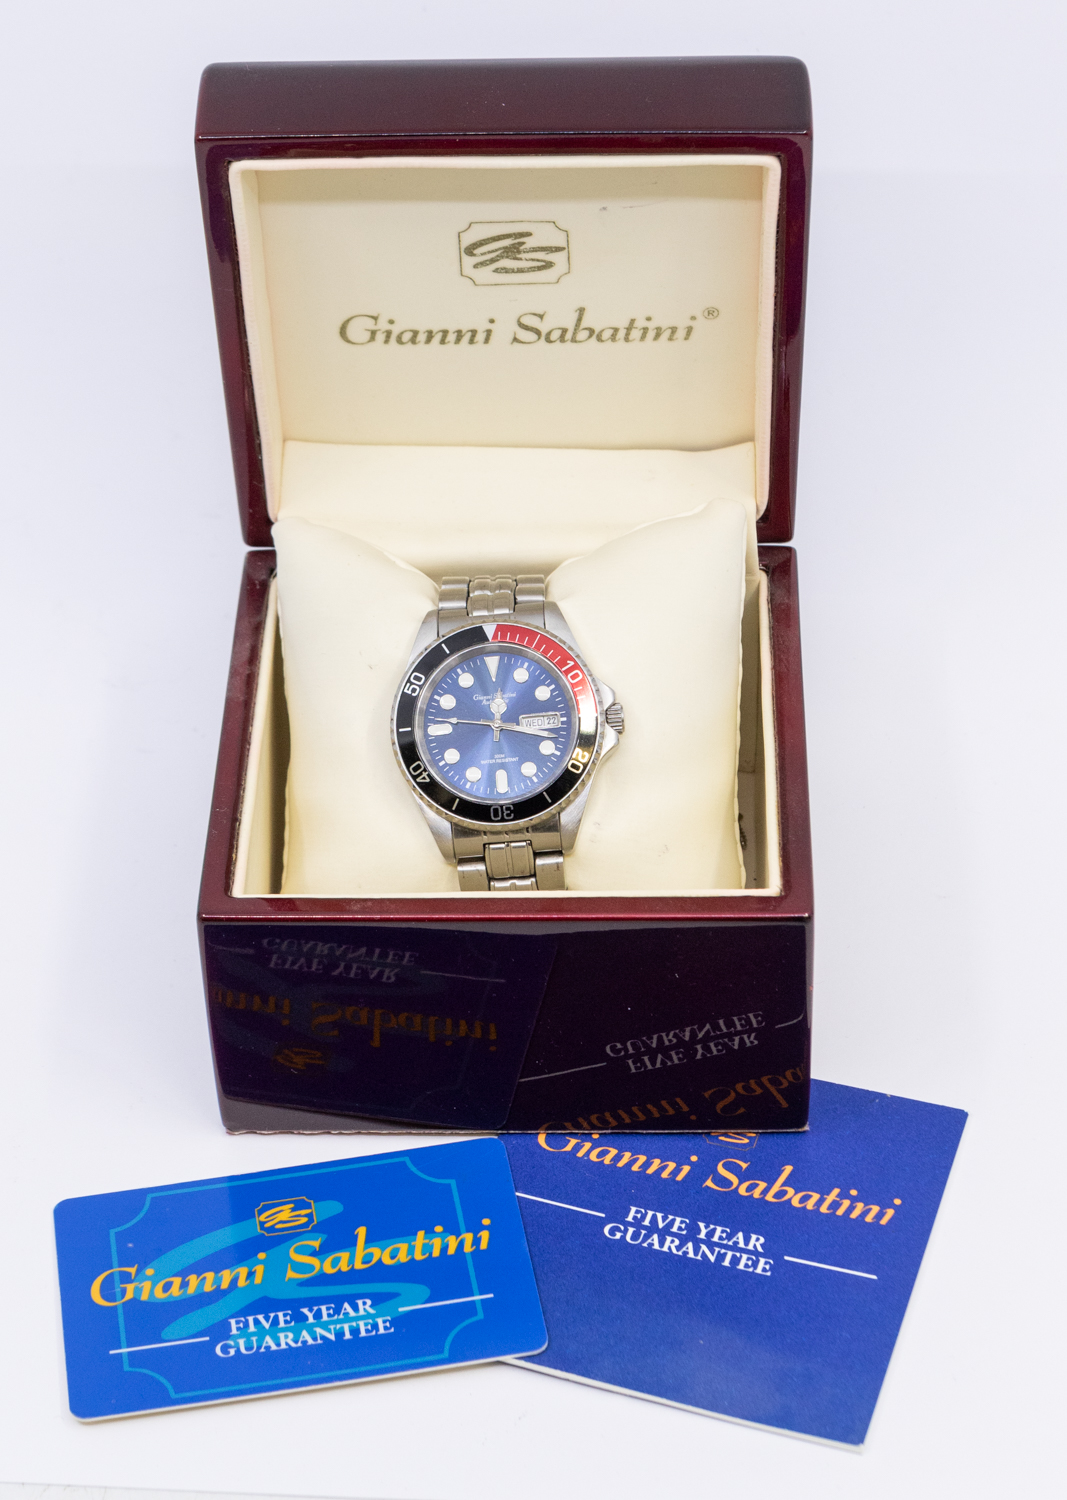 Men's Gianni Sabatini Automatic Pepsi bezel- Model NGS 414B watch boxed. The movement is Automatic. - Image 2 of 3